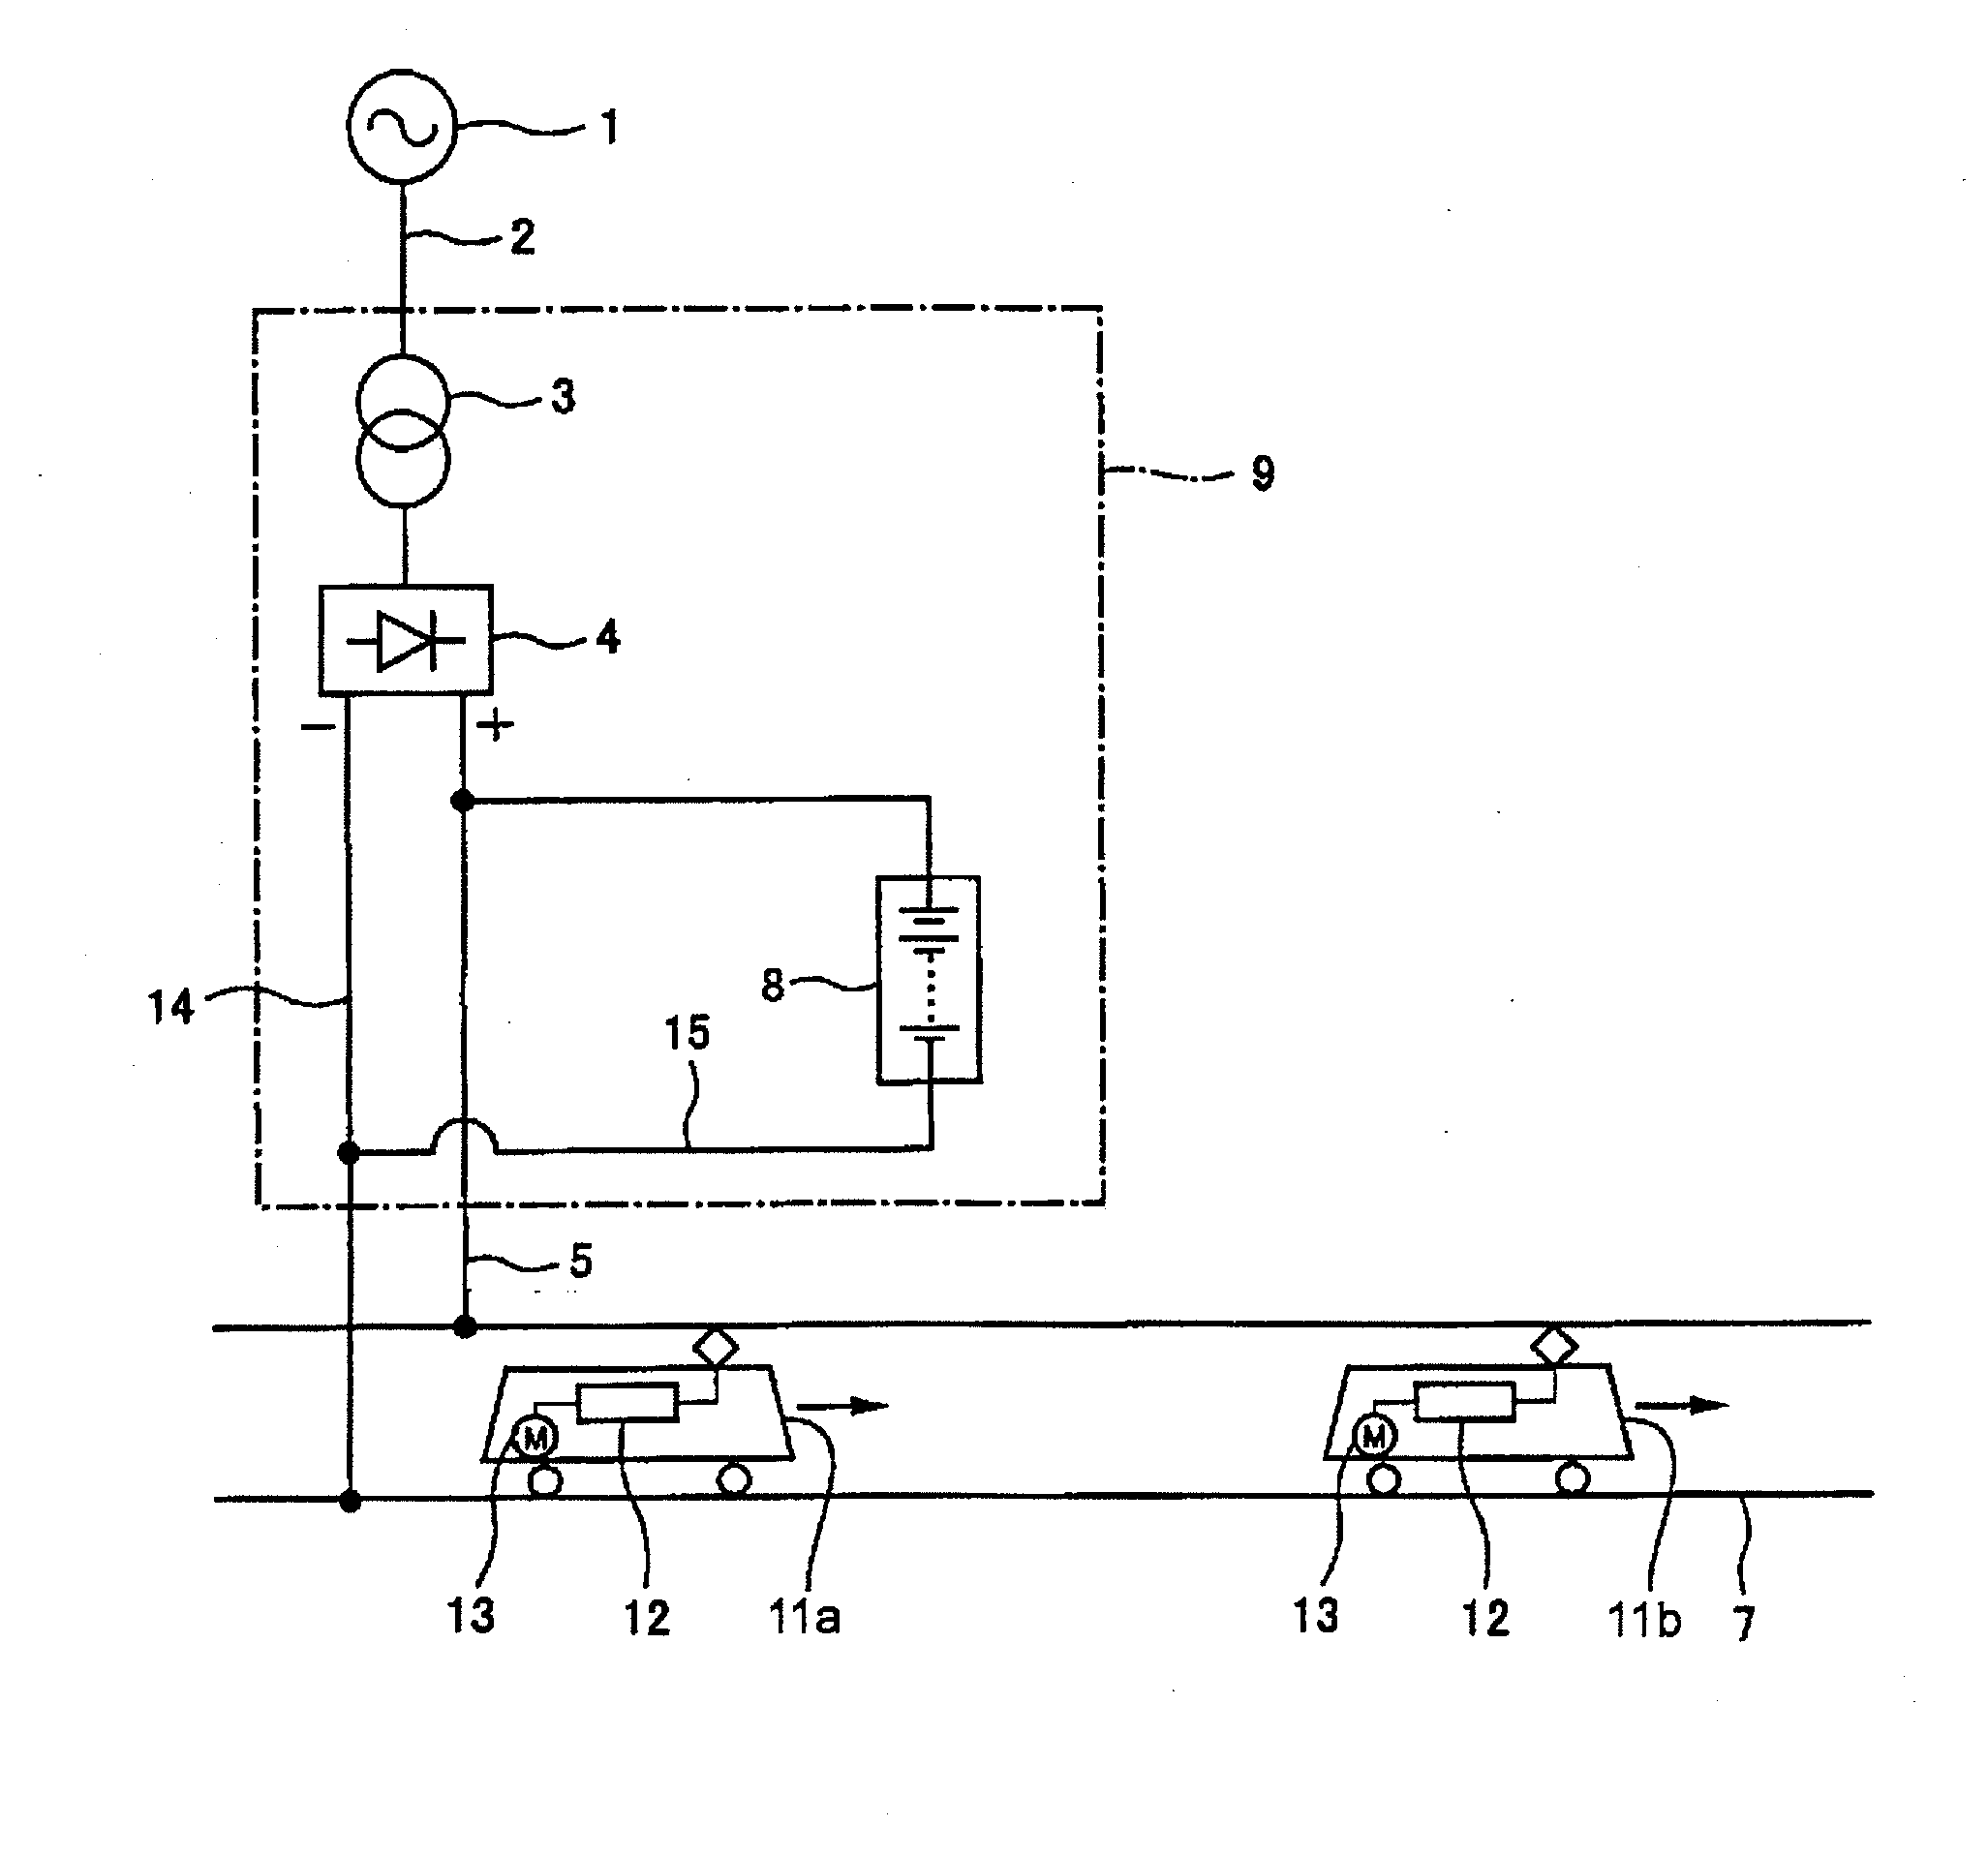 Electric railway power-supply system